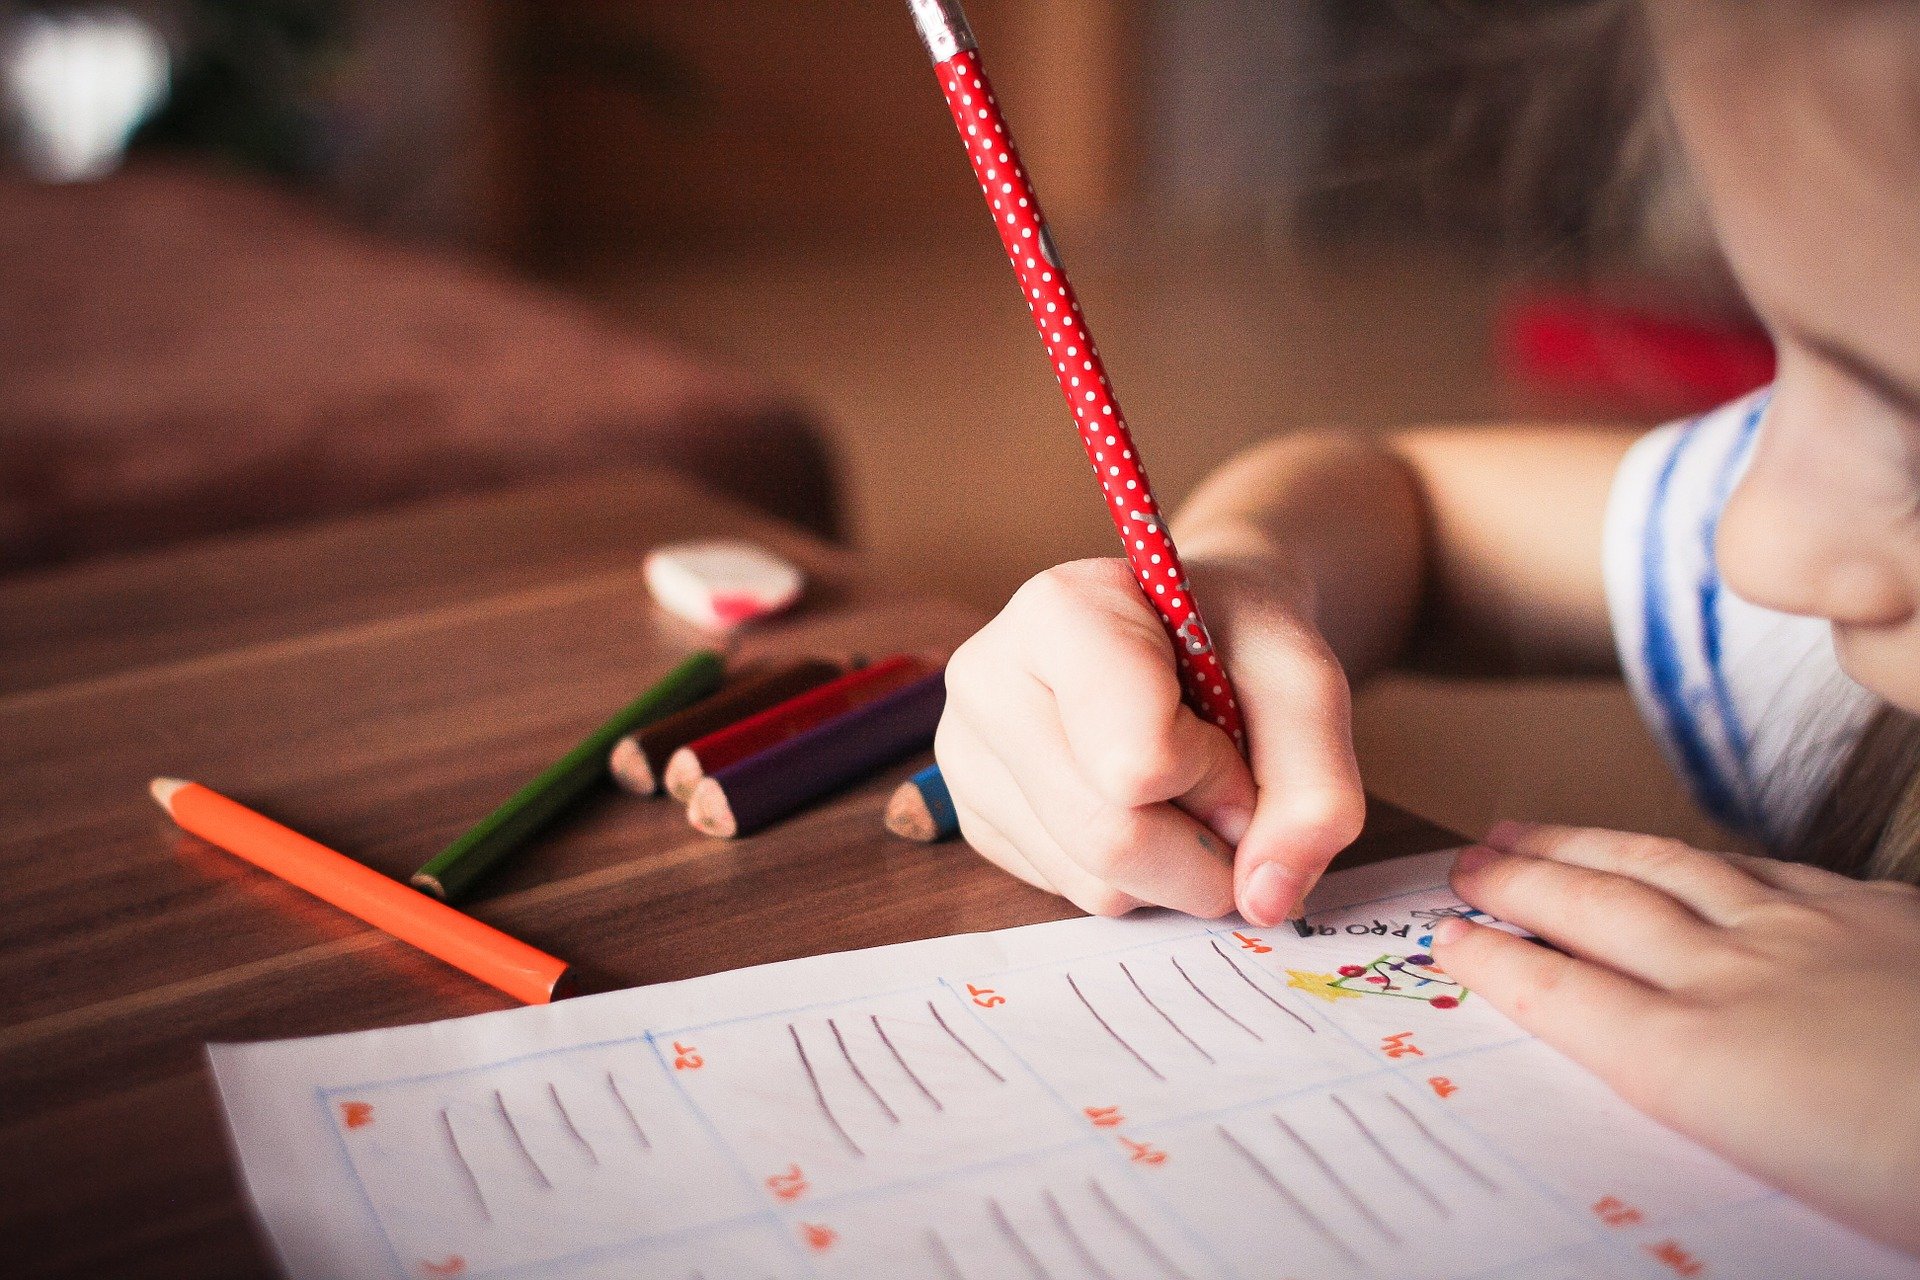 EDUCATION | Launch of new course could be a lifeline for children who struggle with handwriting